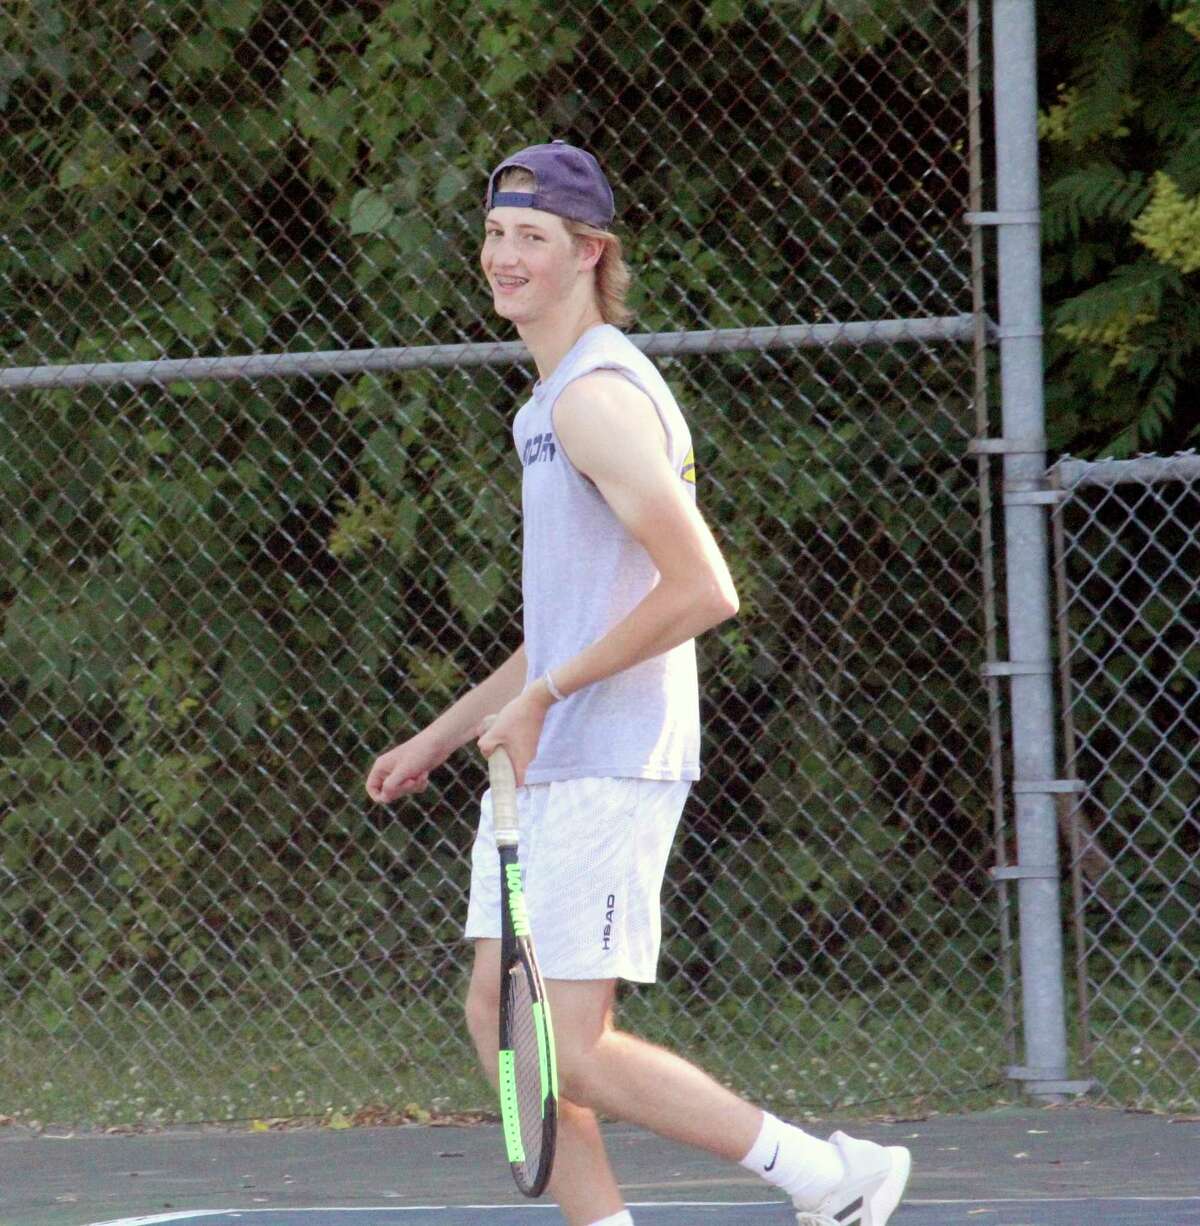 Spencer Olen, the lone senior on the Big Rapids tennis team, finishes his Cardinal career with 65 total wins. (Pioneer photo/John Raffel)